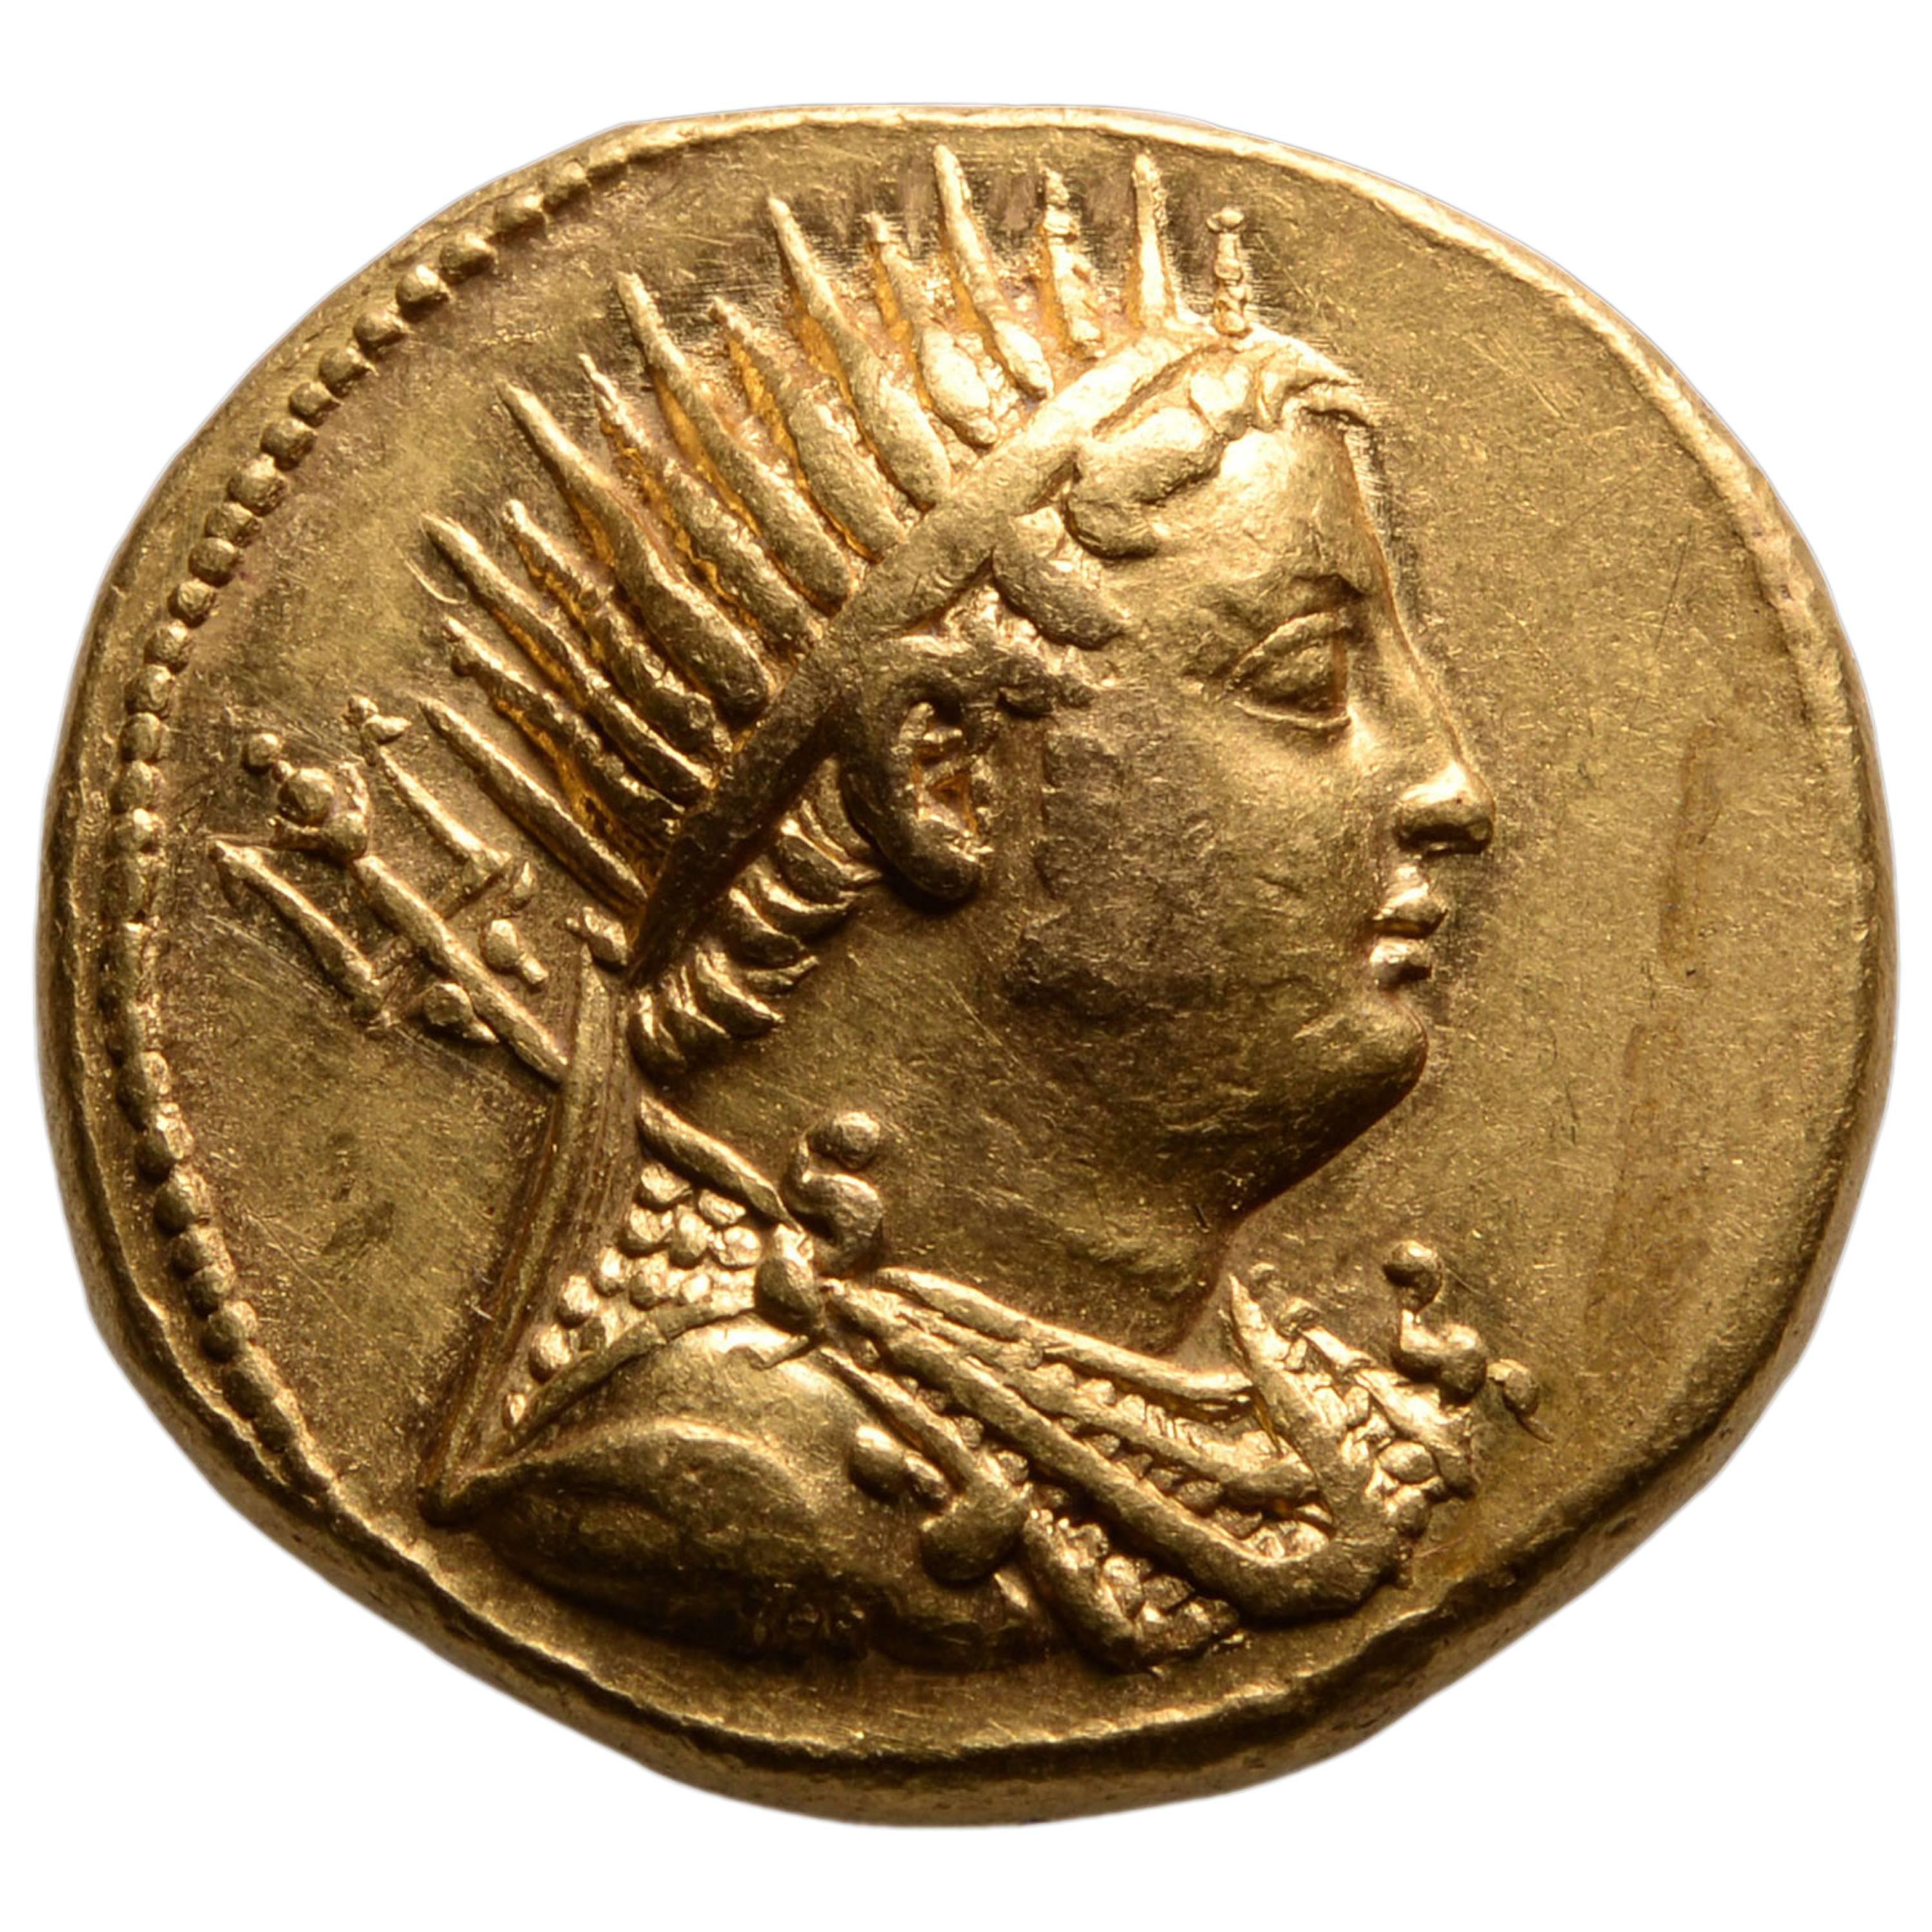 Large Ancient Greek Gold Coin of King Ptolemy IV, 221 BC